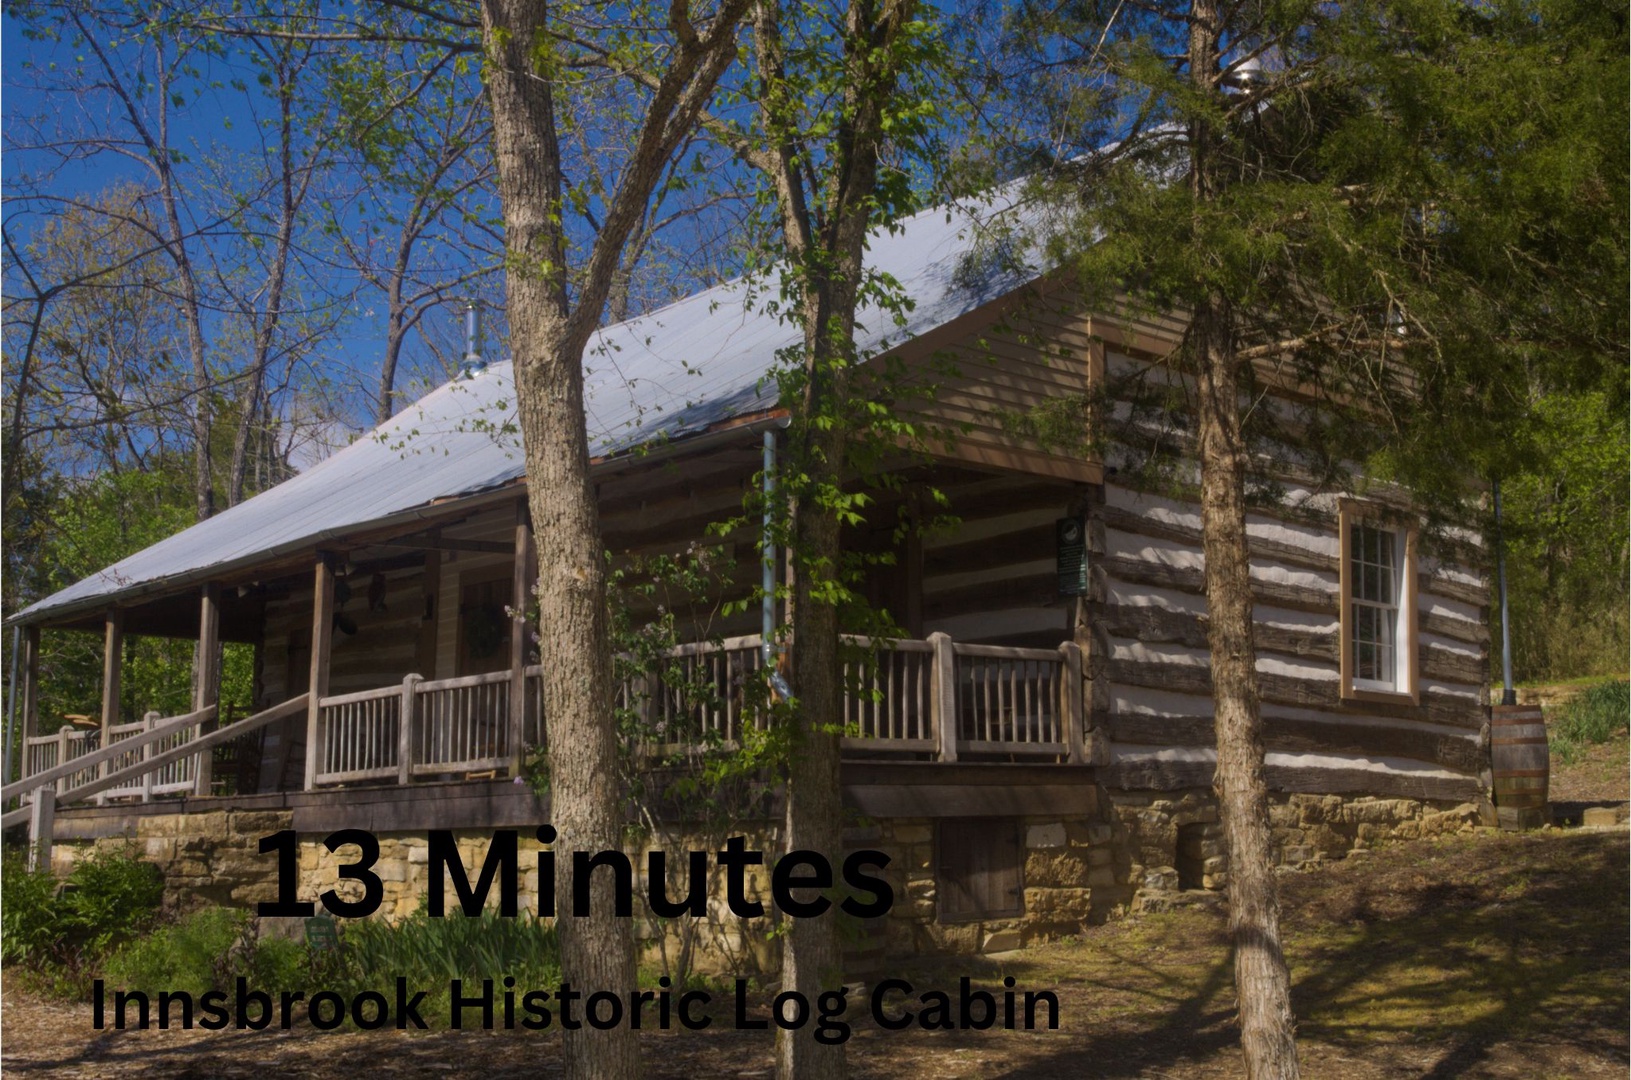 The historic cabin and schoolhouse are an enchanting adventure back in time!